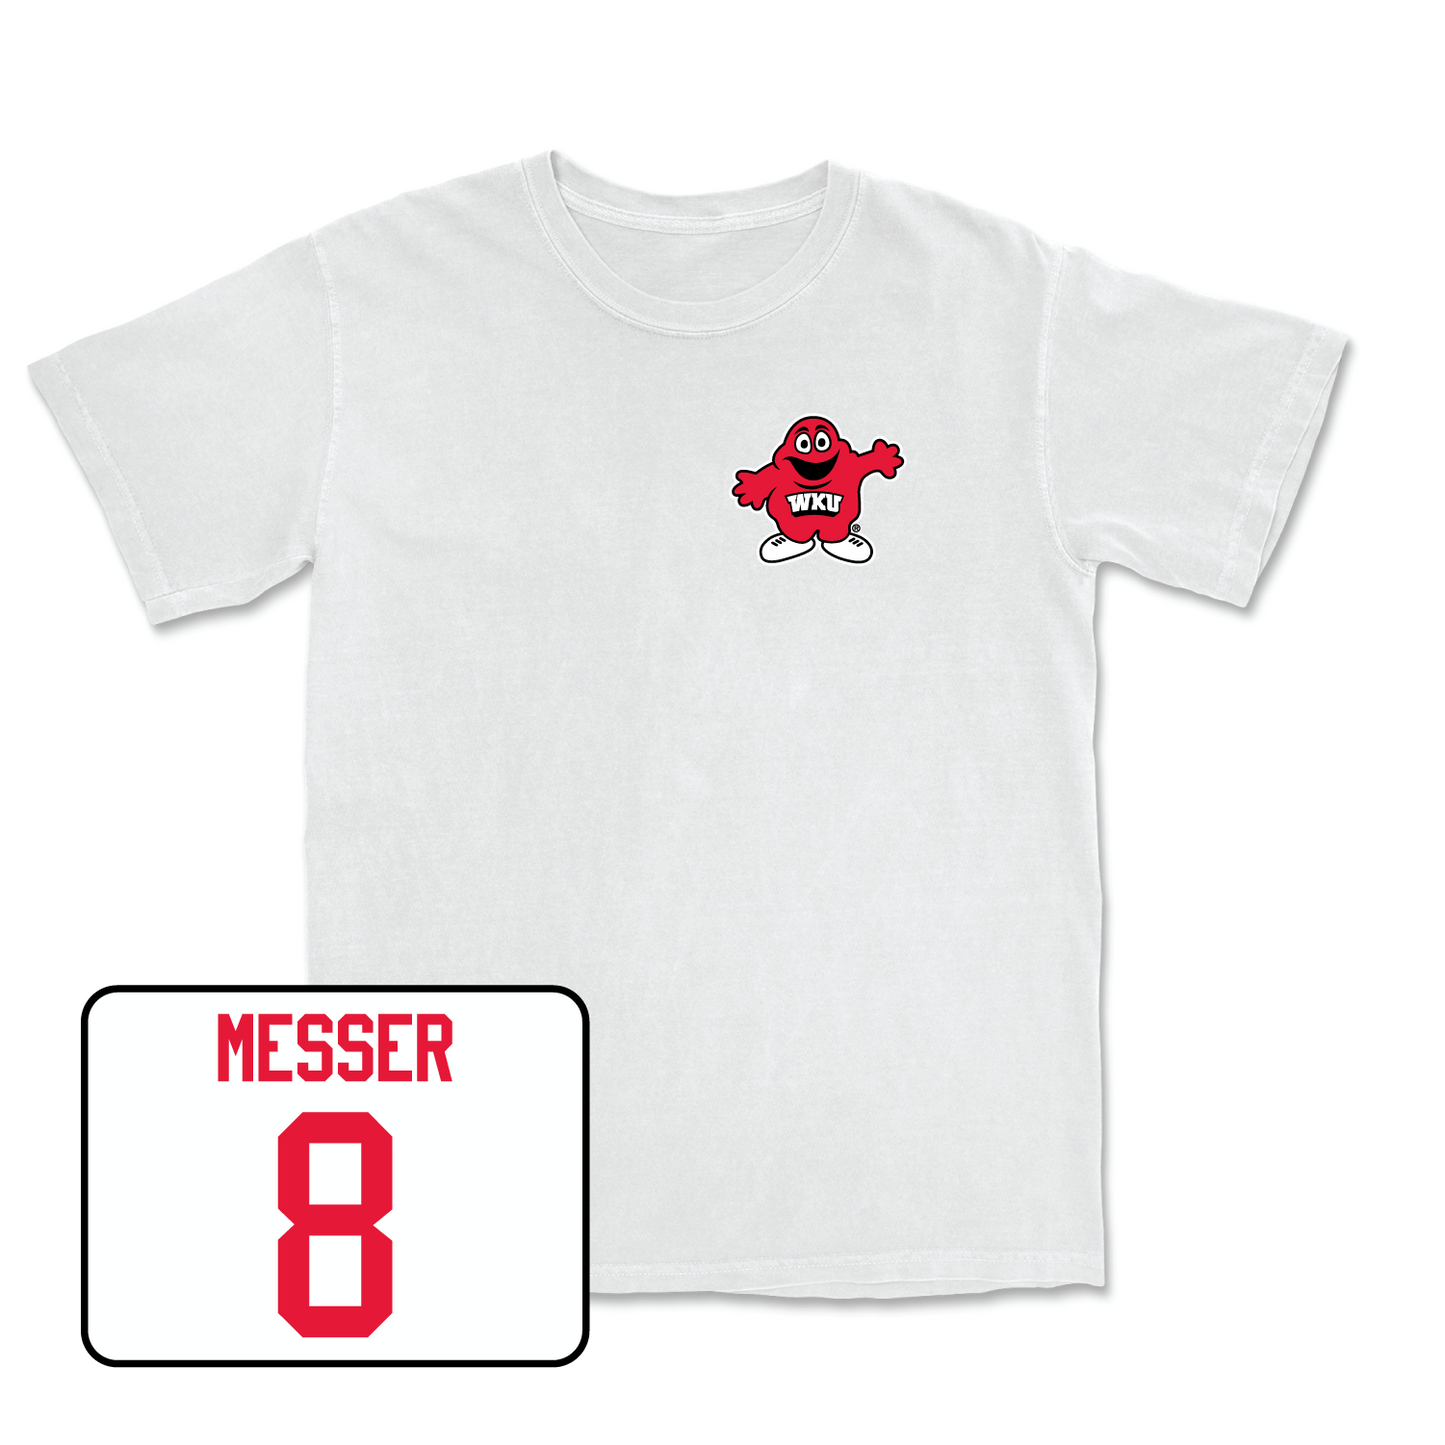 White Football Big Red Comfort Colors Tee 2 2X-Large / Easton Messer | #8